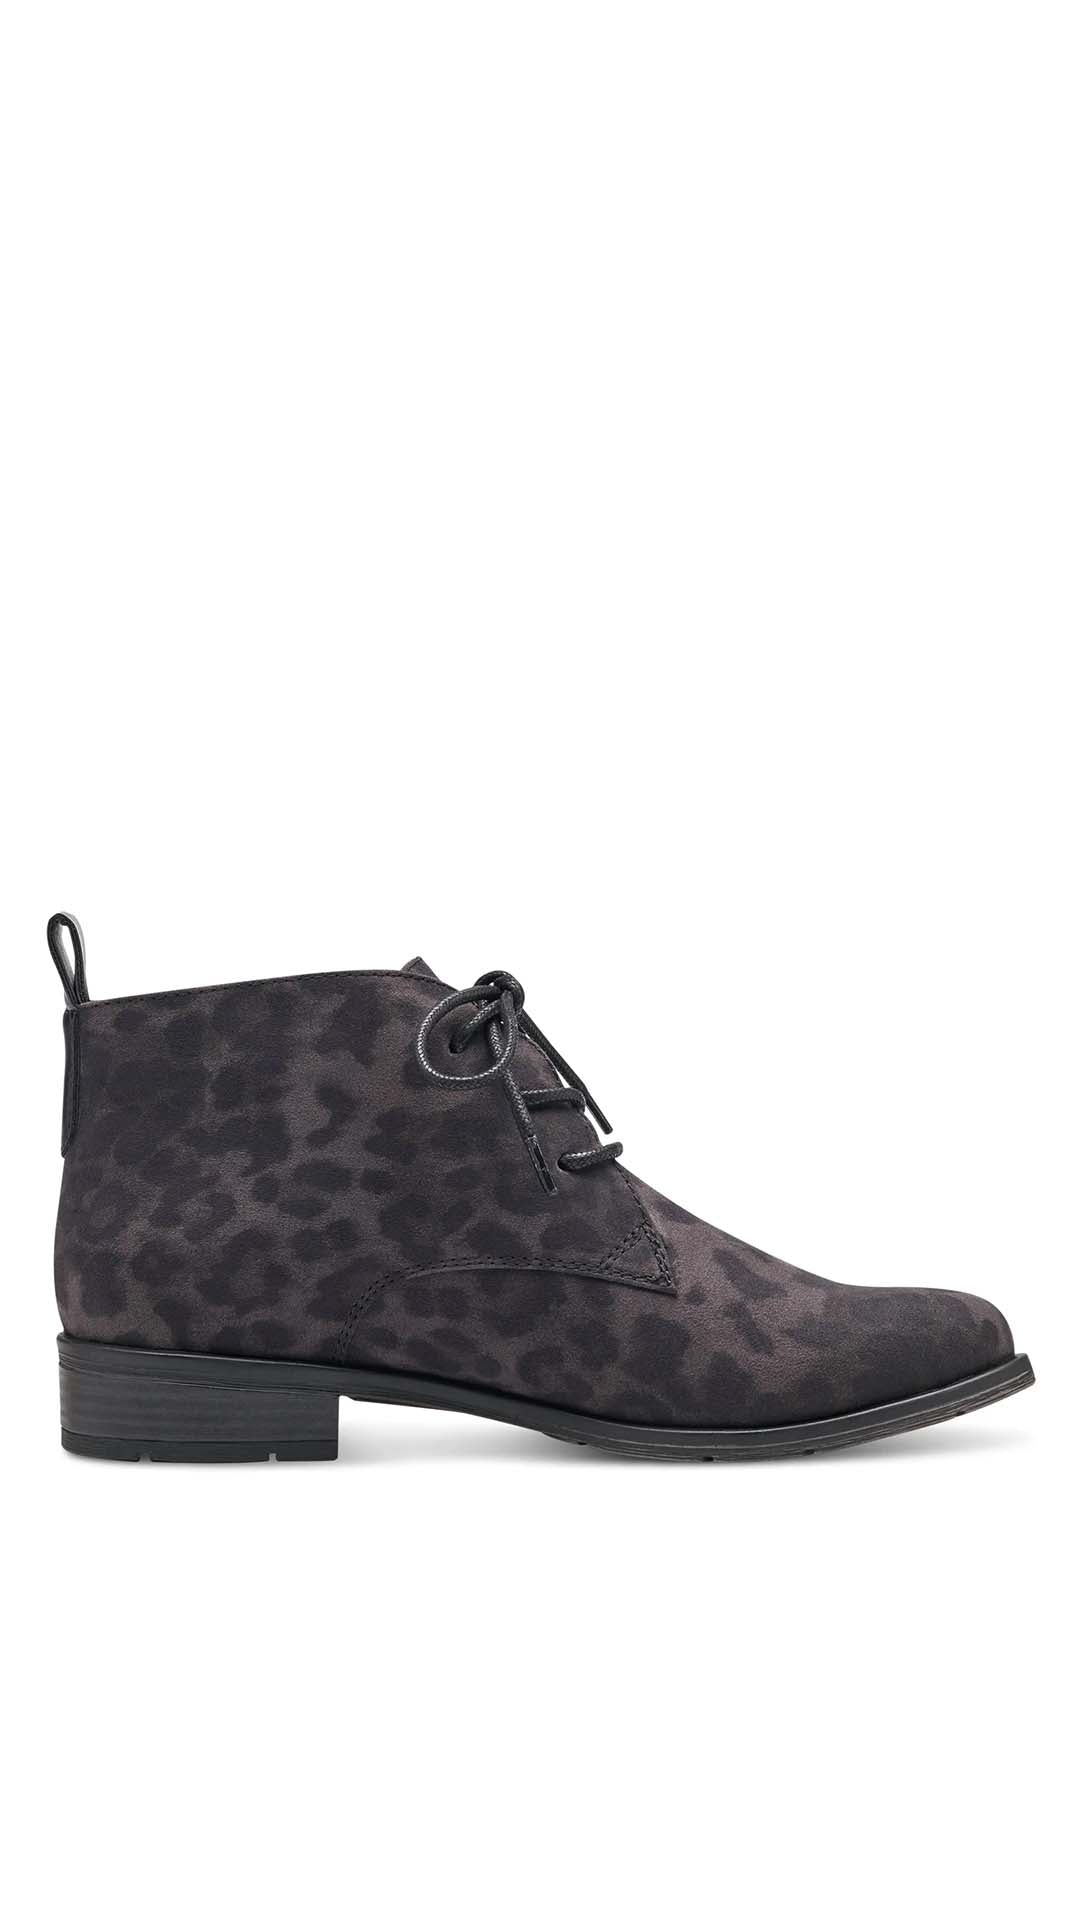 Leo Leopard Print Ankle Boots